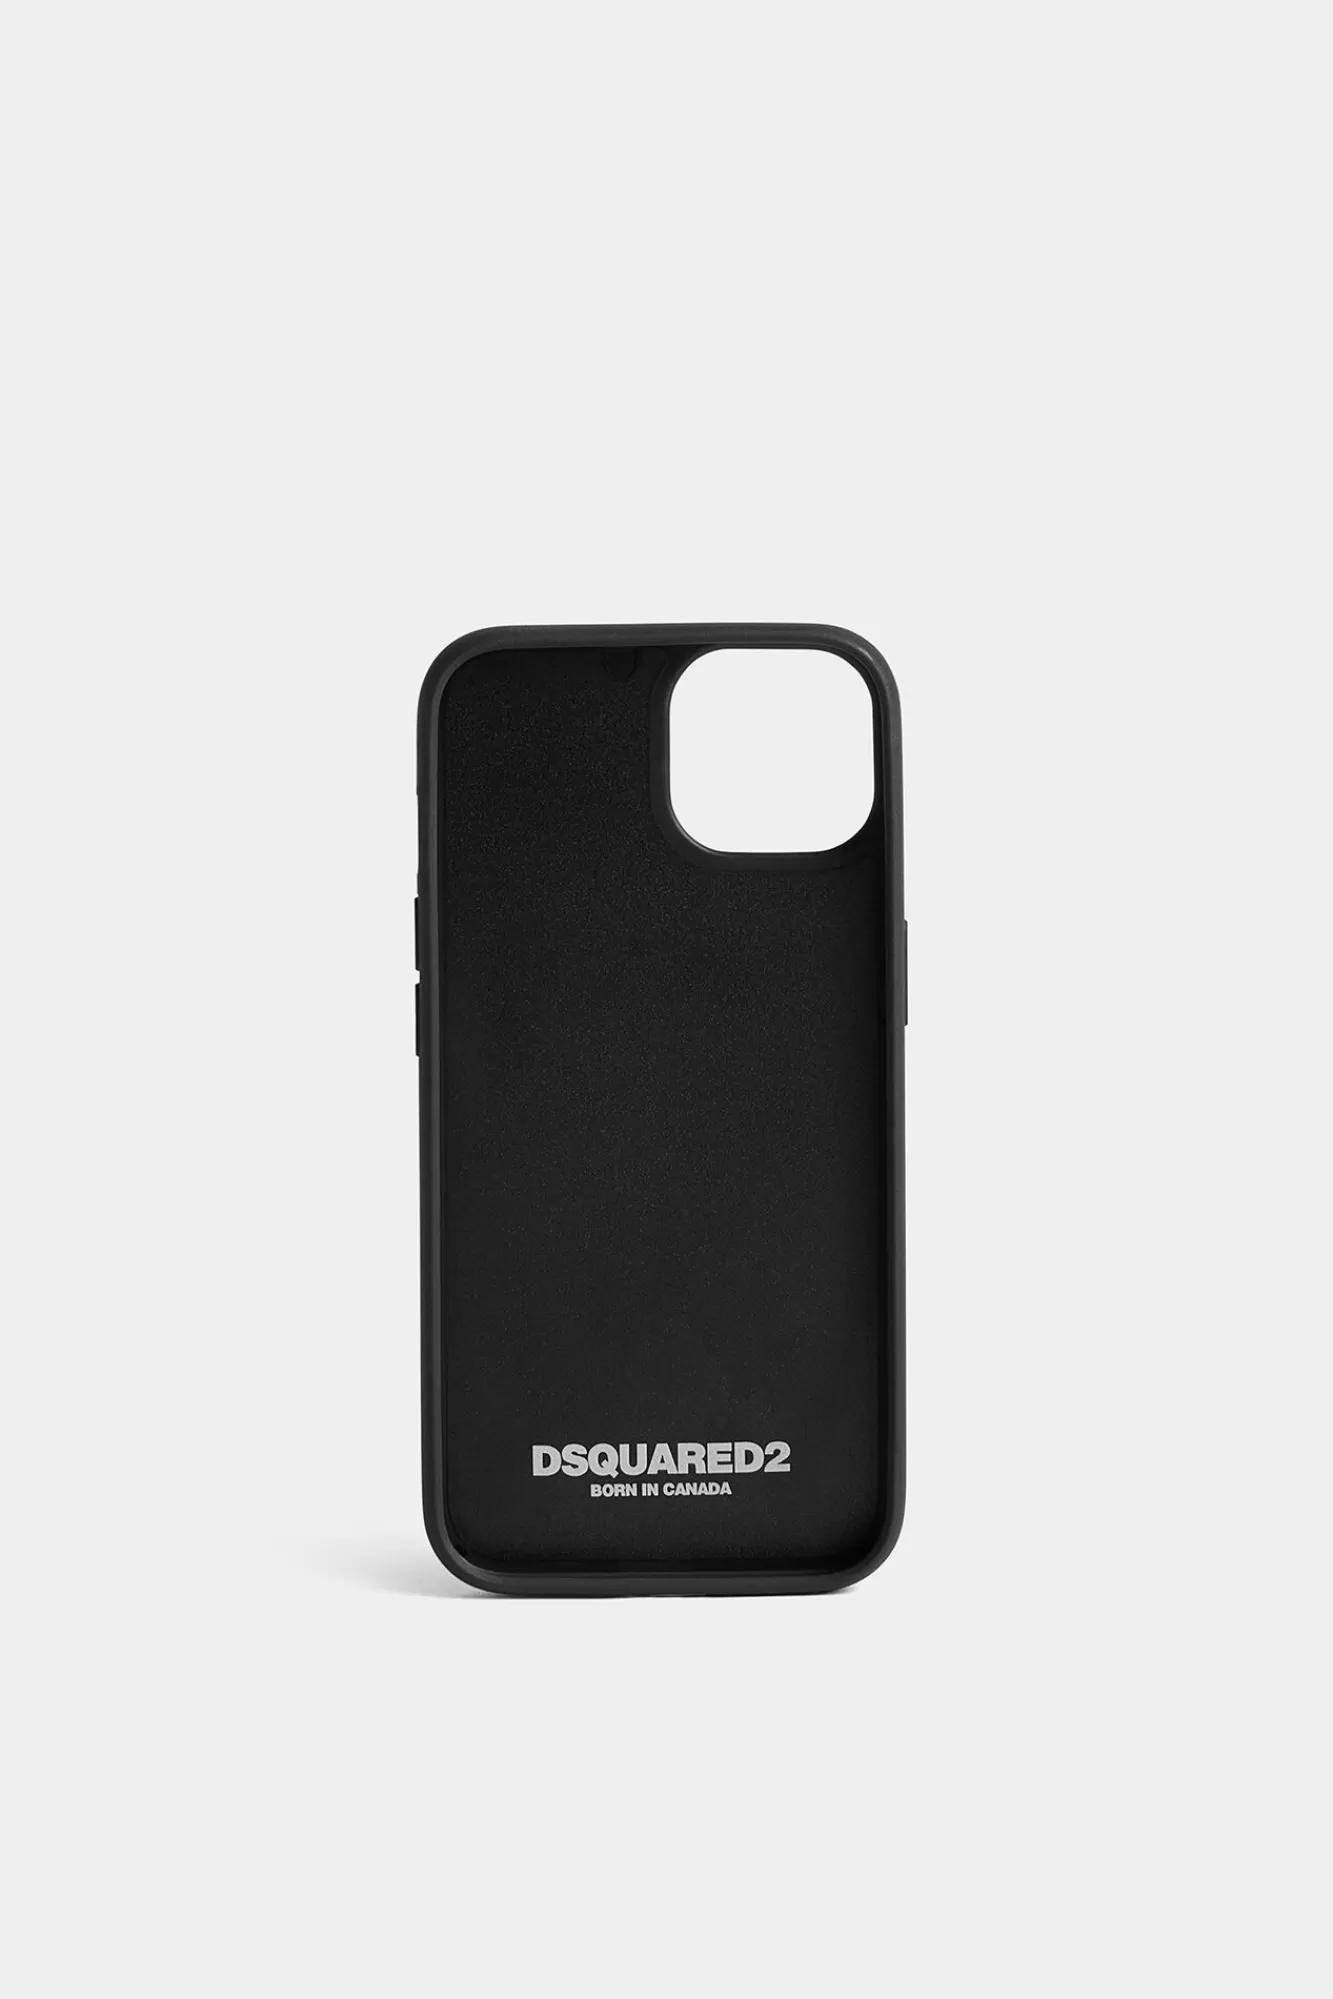 Be Icon Iphone Cover<Dsquared2 Cheap